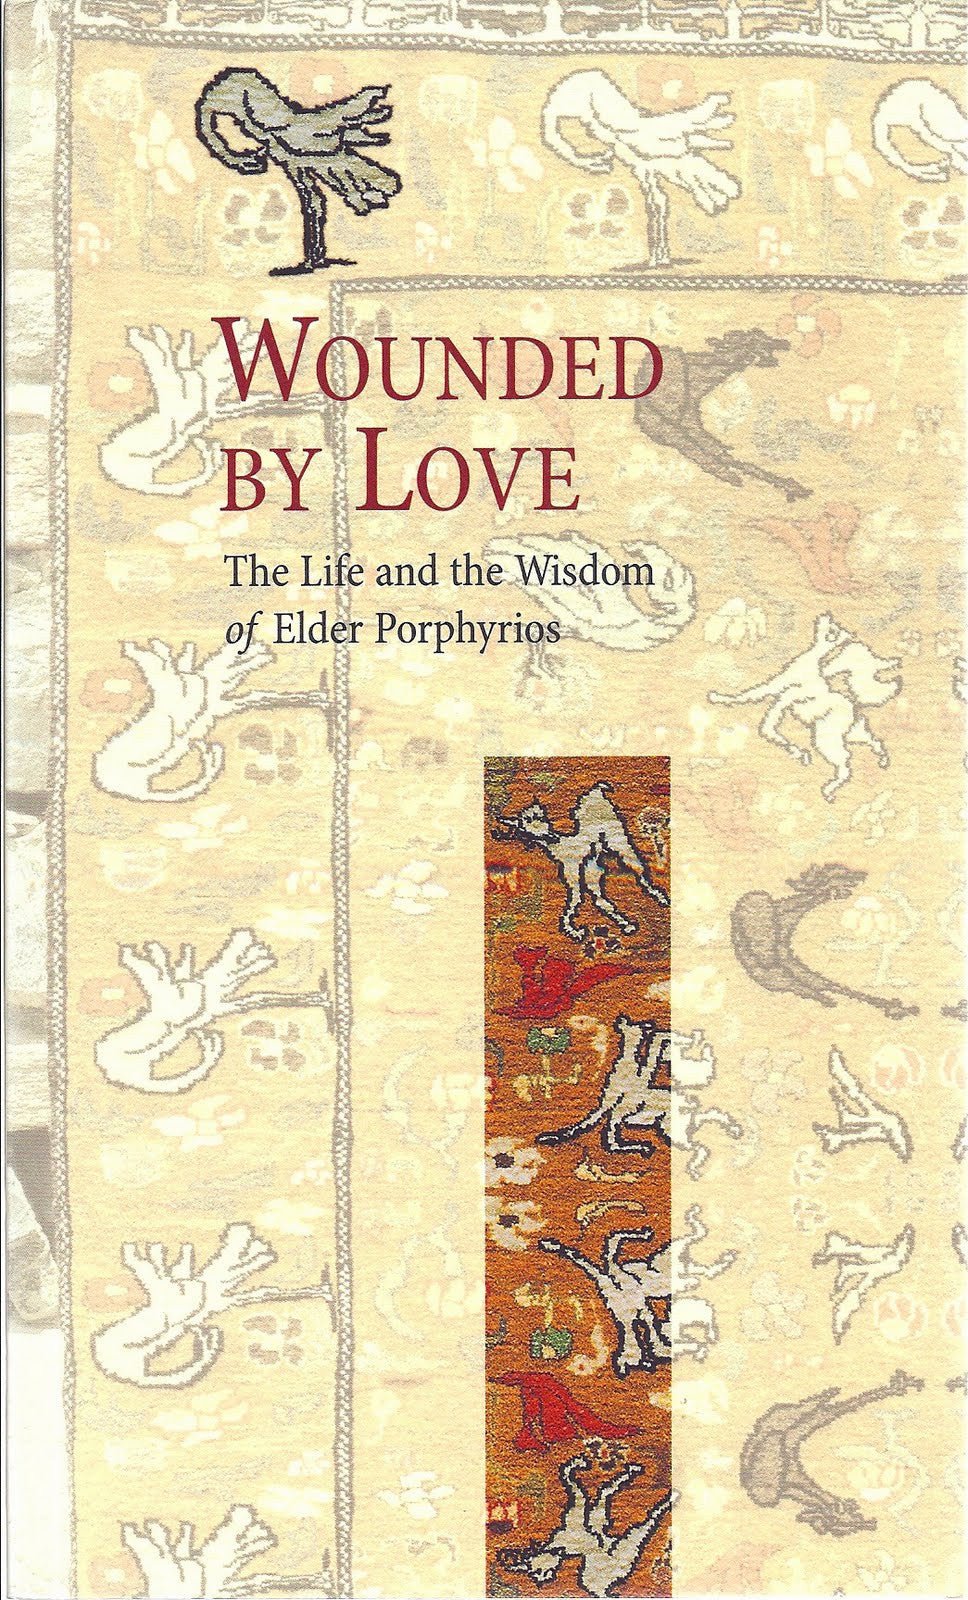 Wounded By Love - The Life and the Wisdom of Saint Porphyrios - Holy Cross Monastery